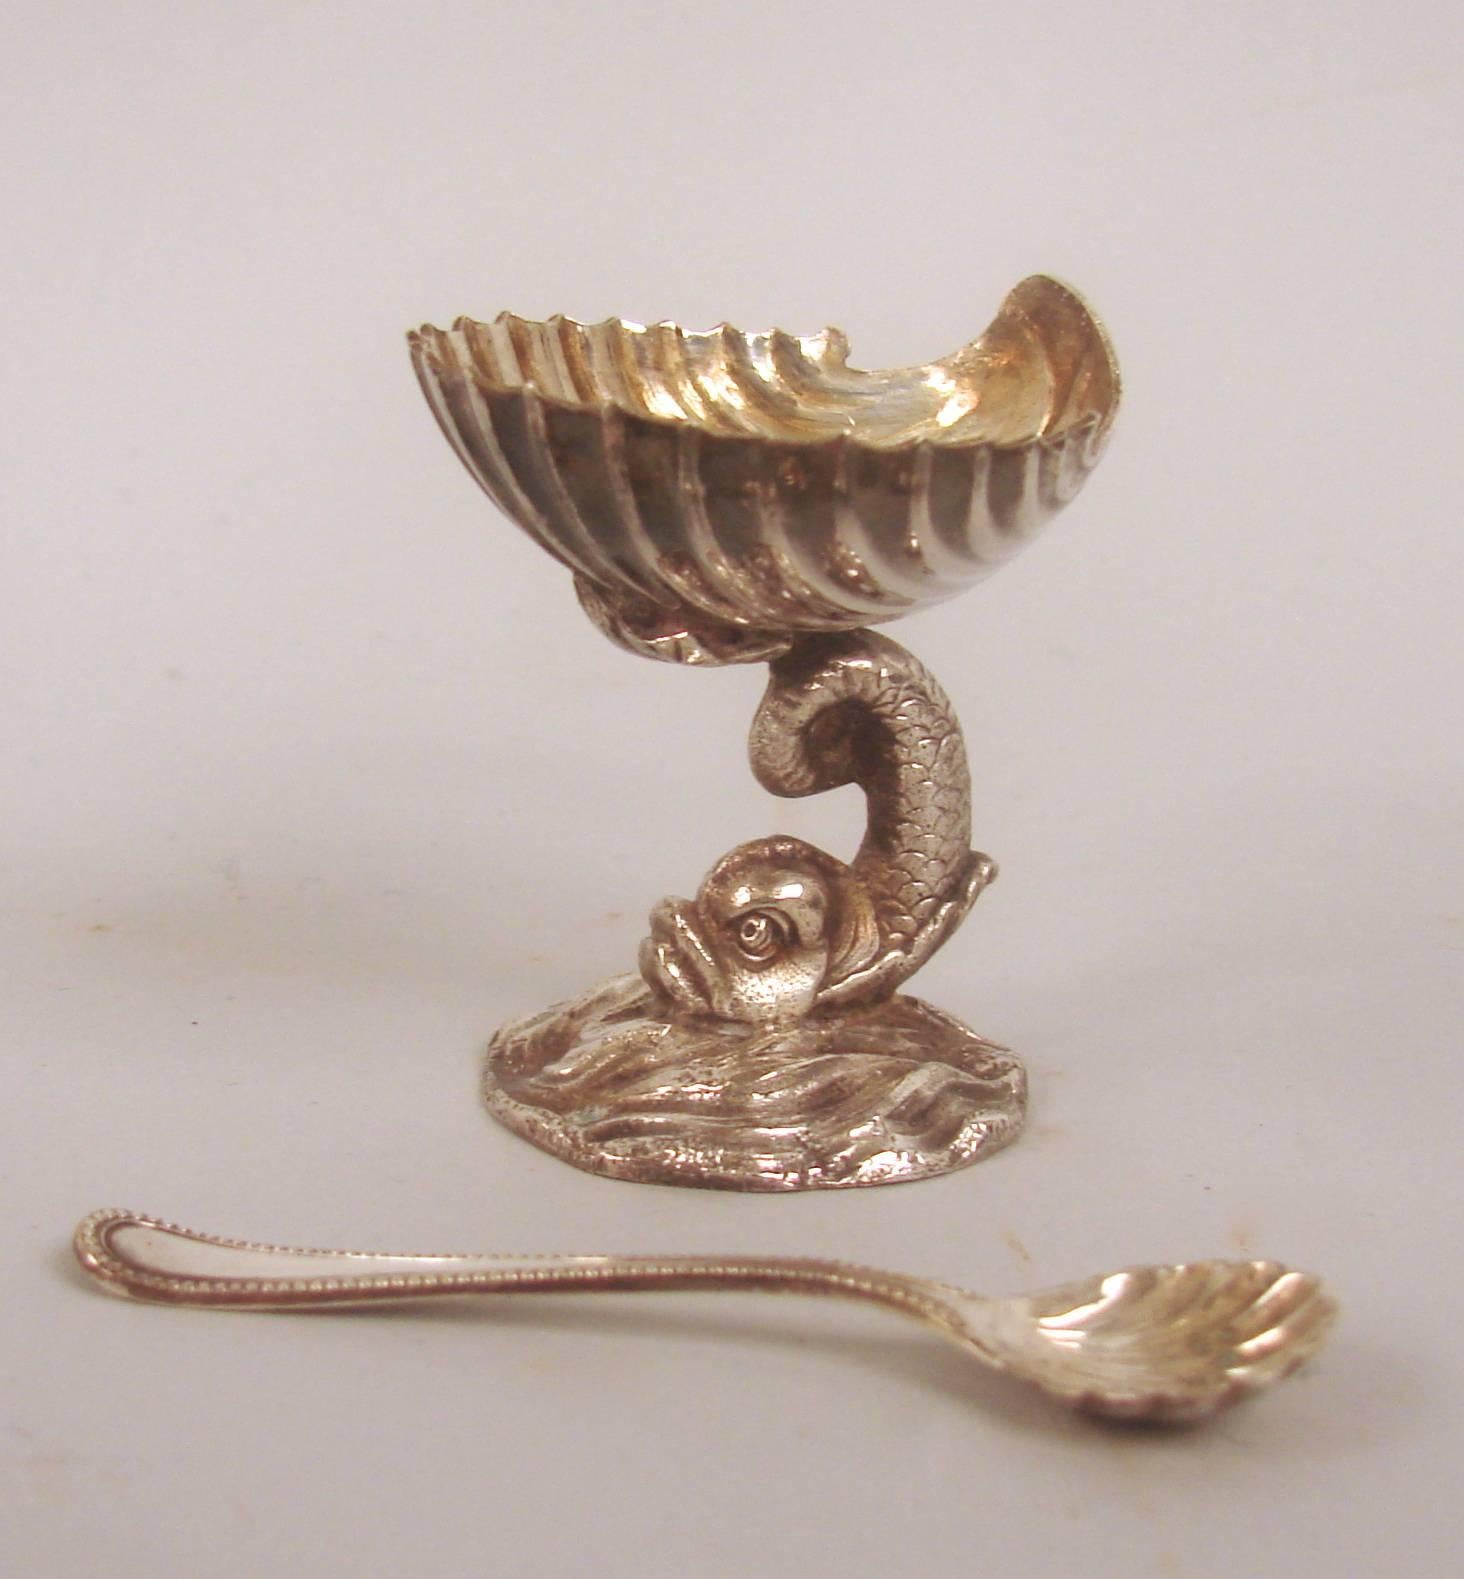 A cased set of six English silver plated salt cellars and spoons, each fashioned as a small compote with a shell form top on a cast dolphin form pedestal base, circa 1880-1900.